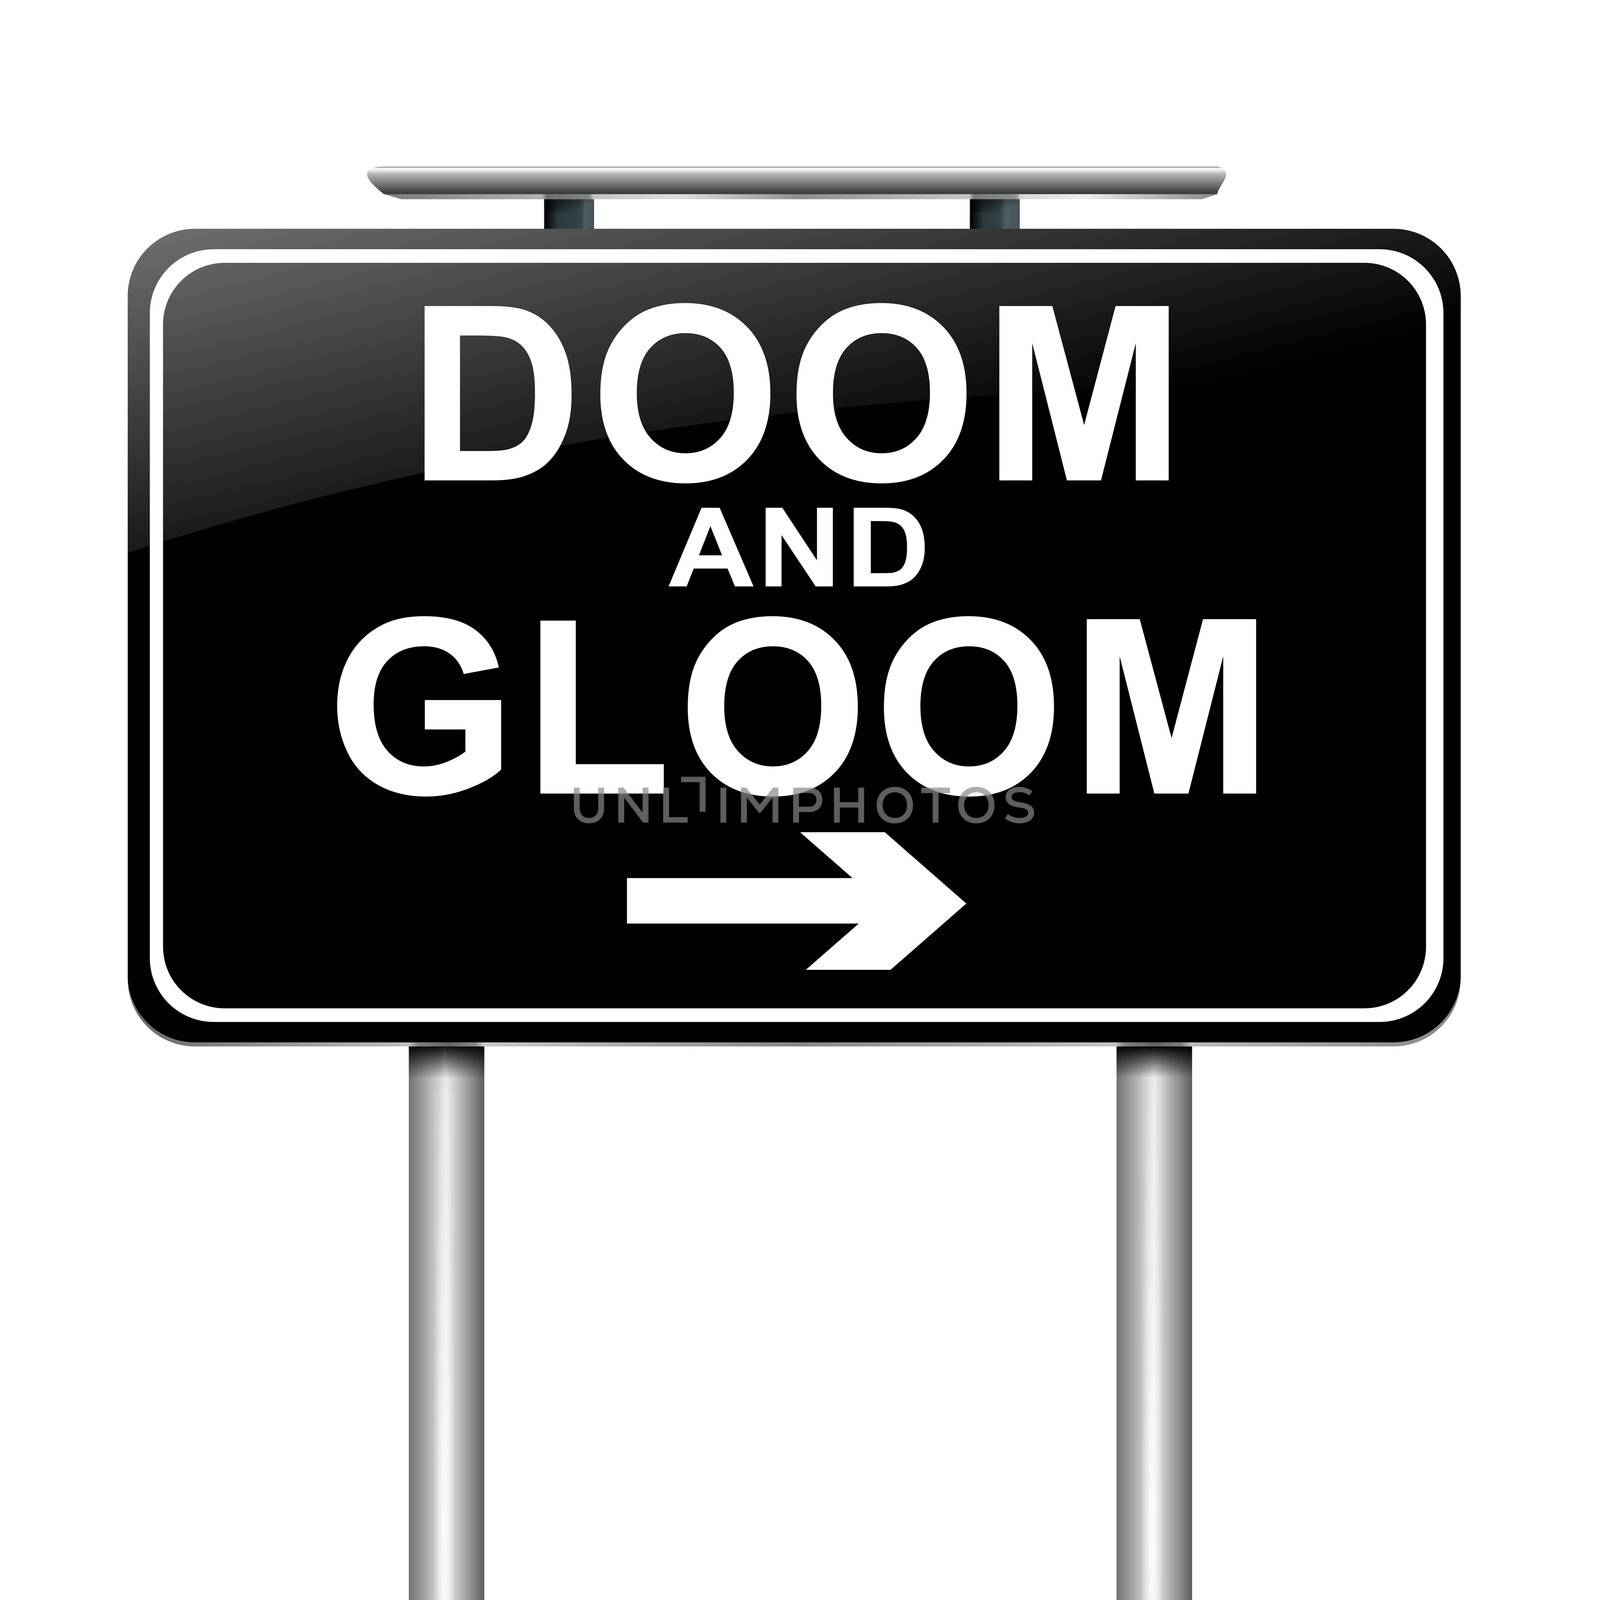 Illustration depicting a sign with a doom and gloom concept.